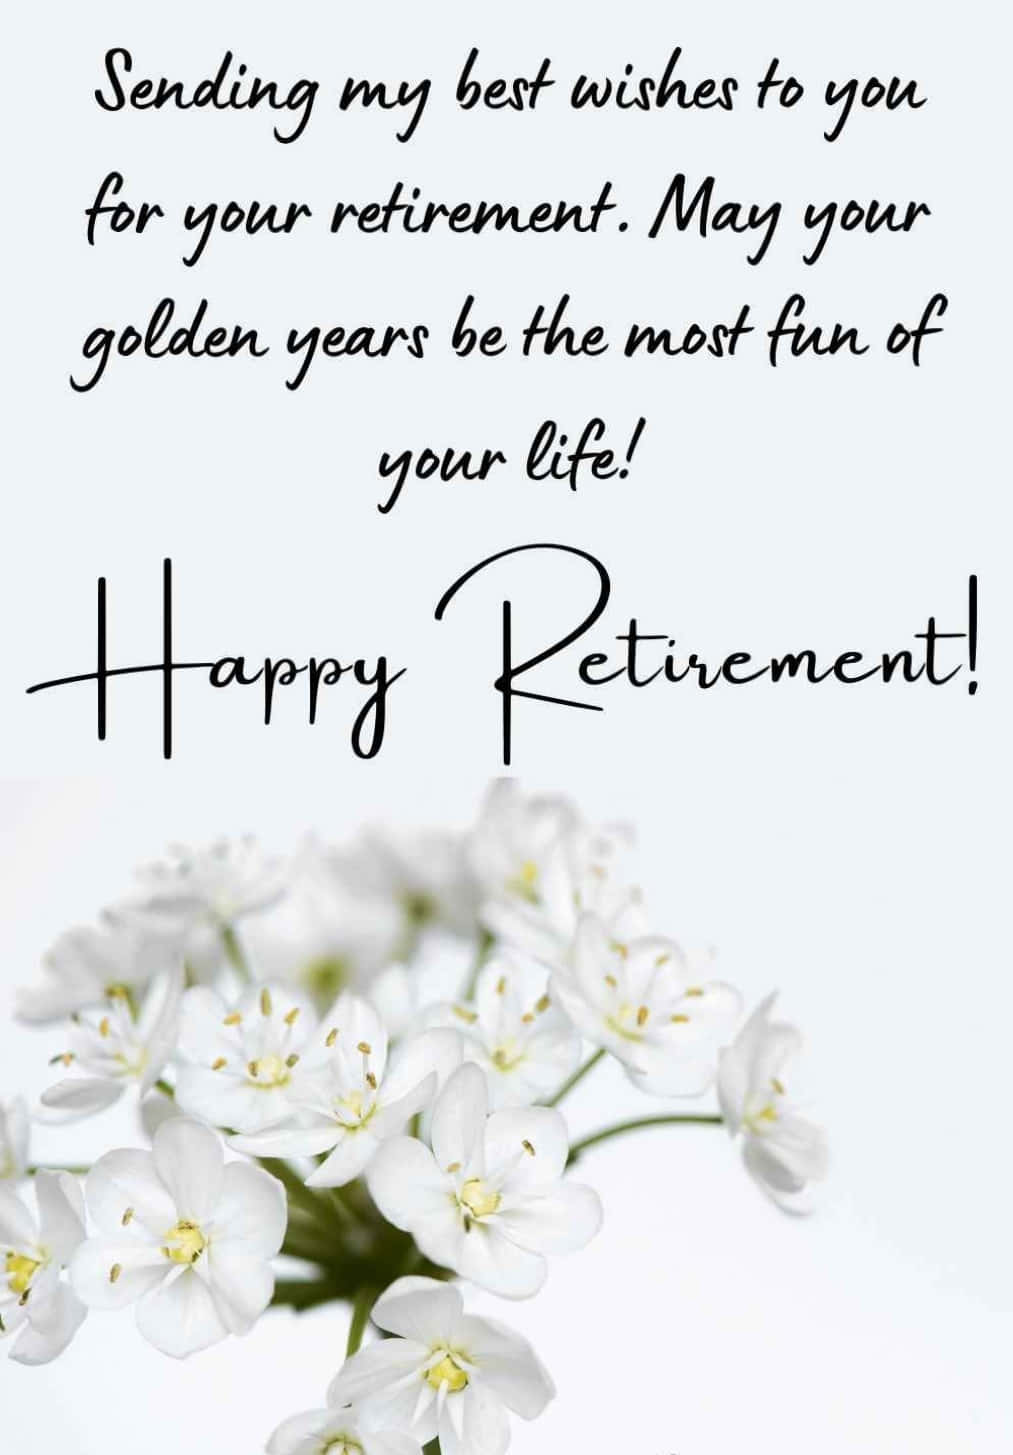 Download happy retirement wishes for your golden years ...